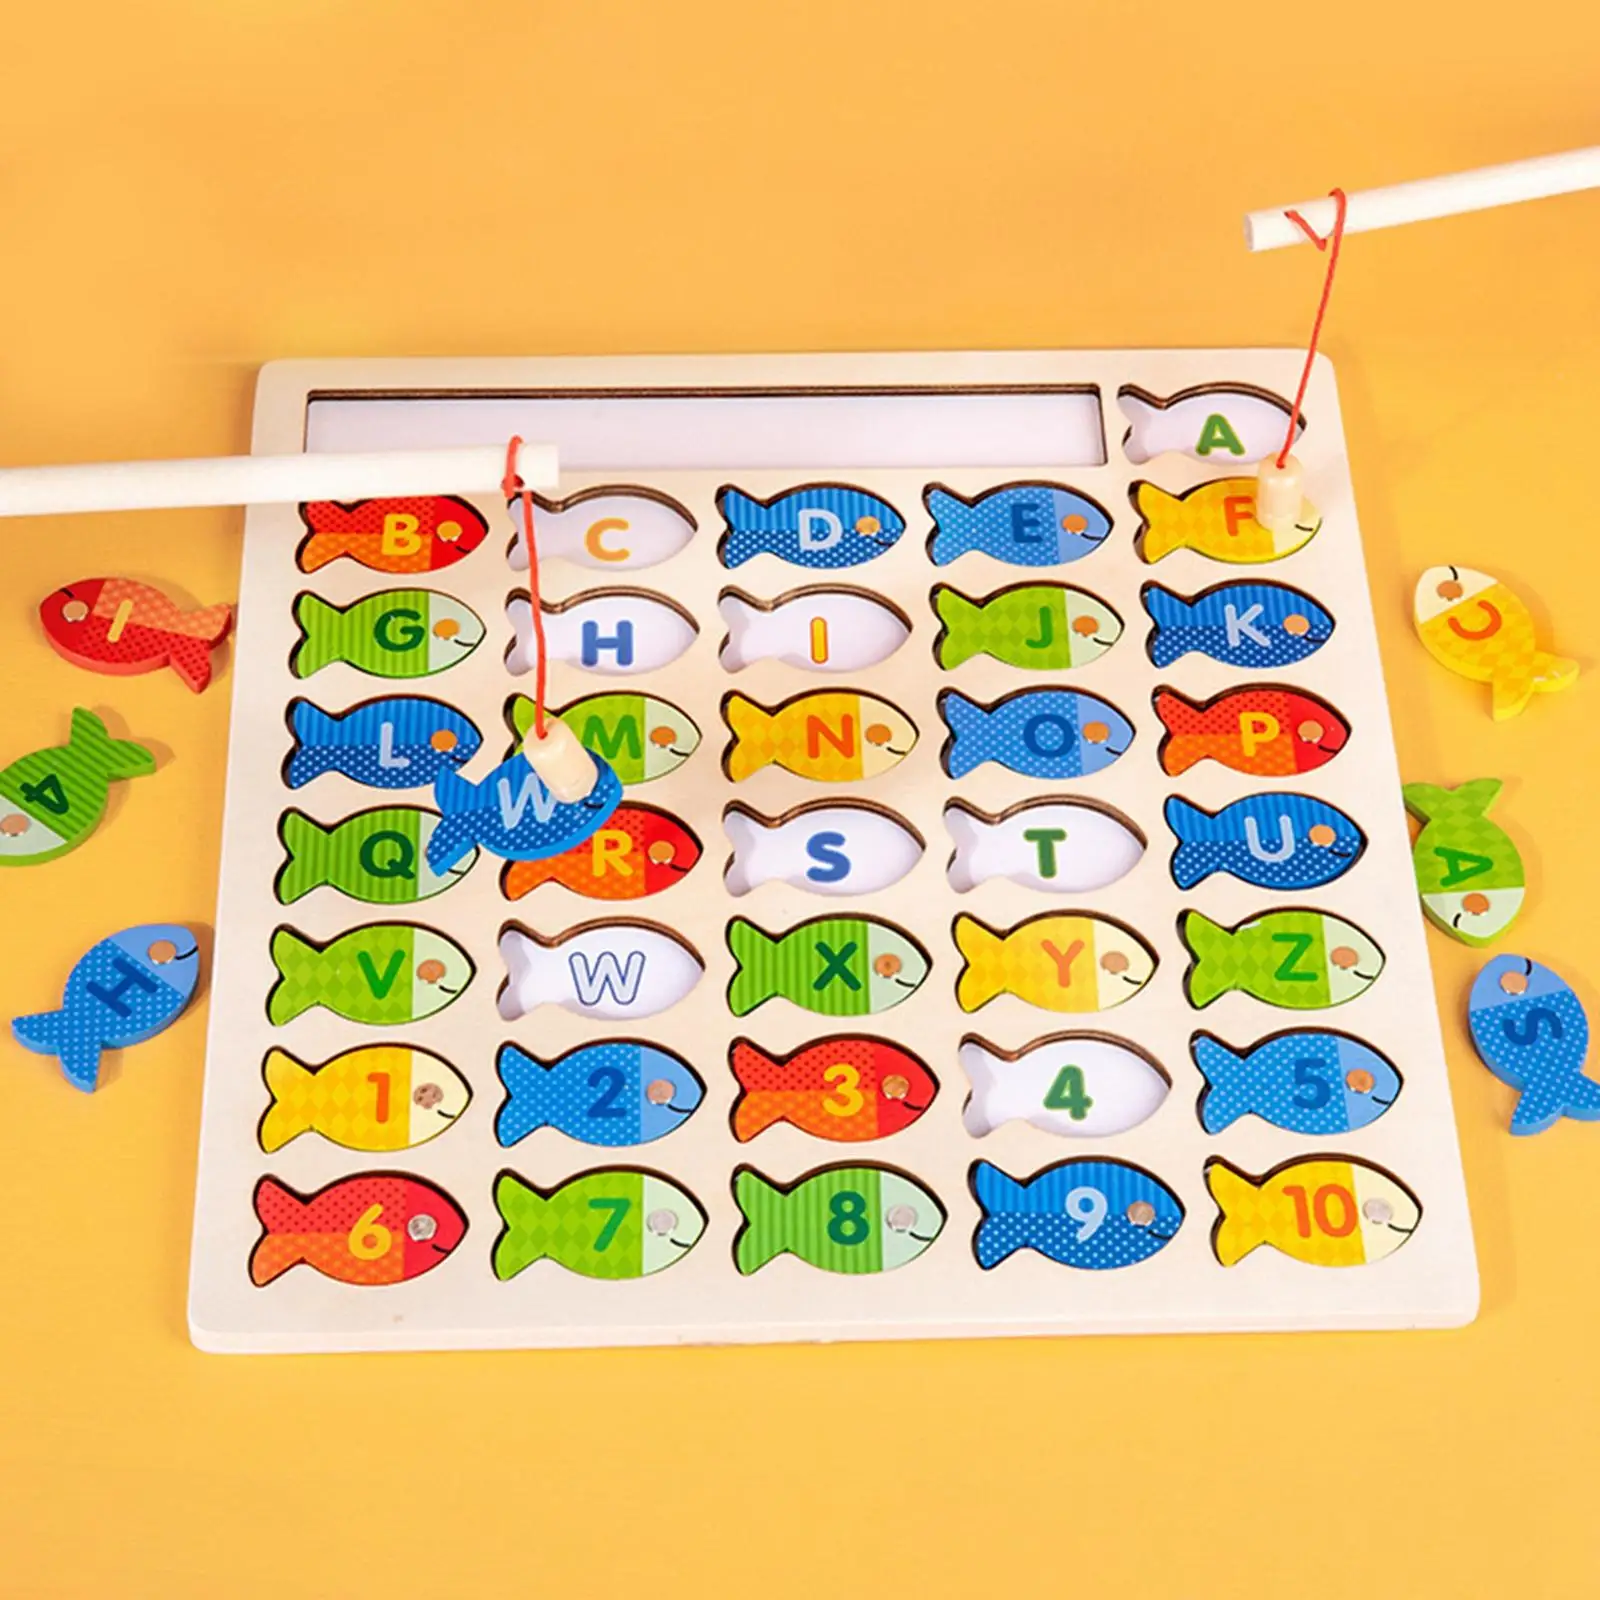 Wooden Fishing Game Play Set with Fishing Poles Pretend Play Developmental Toys Early Learning for Children Boys Girls Toddler